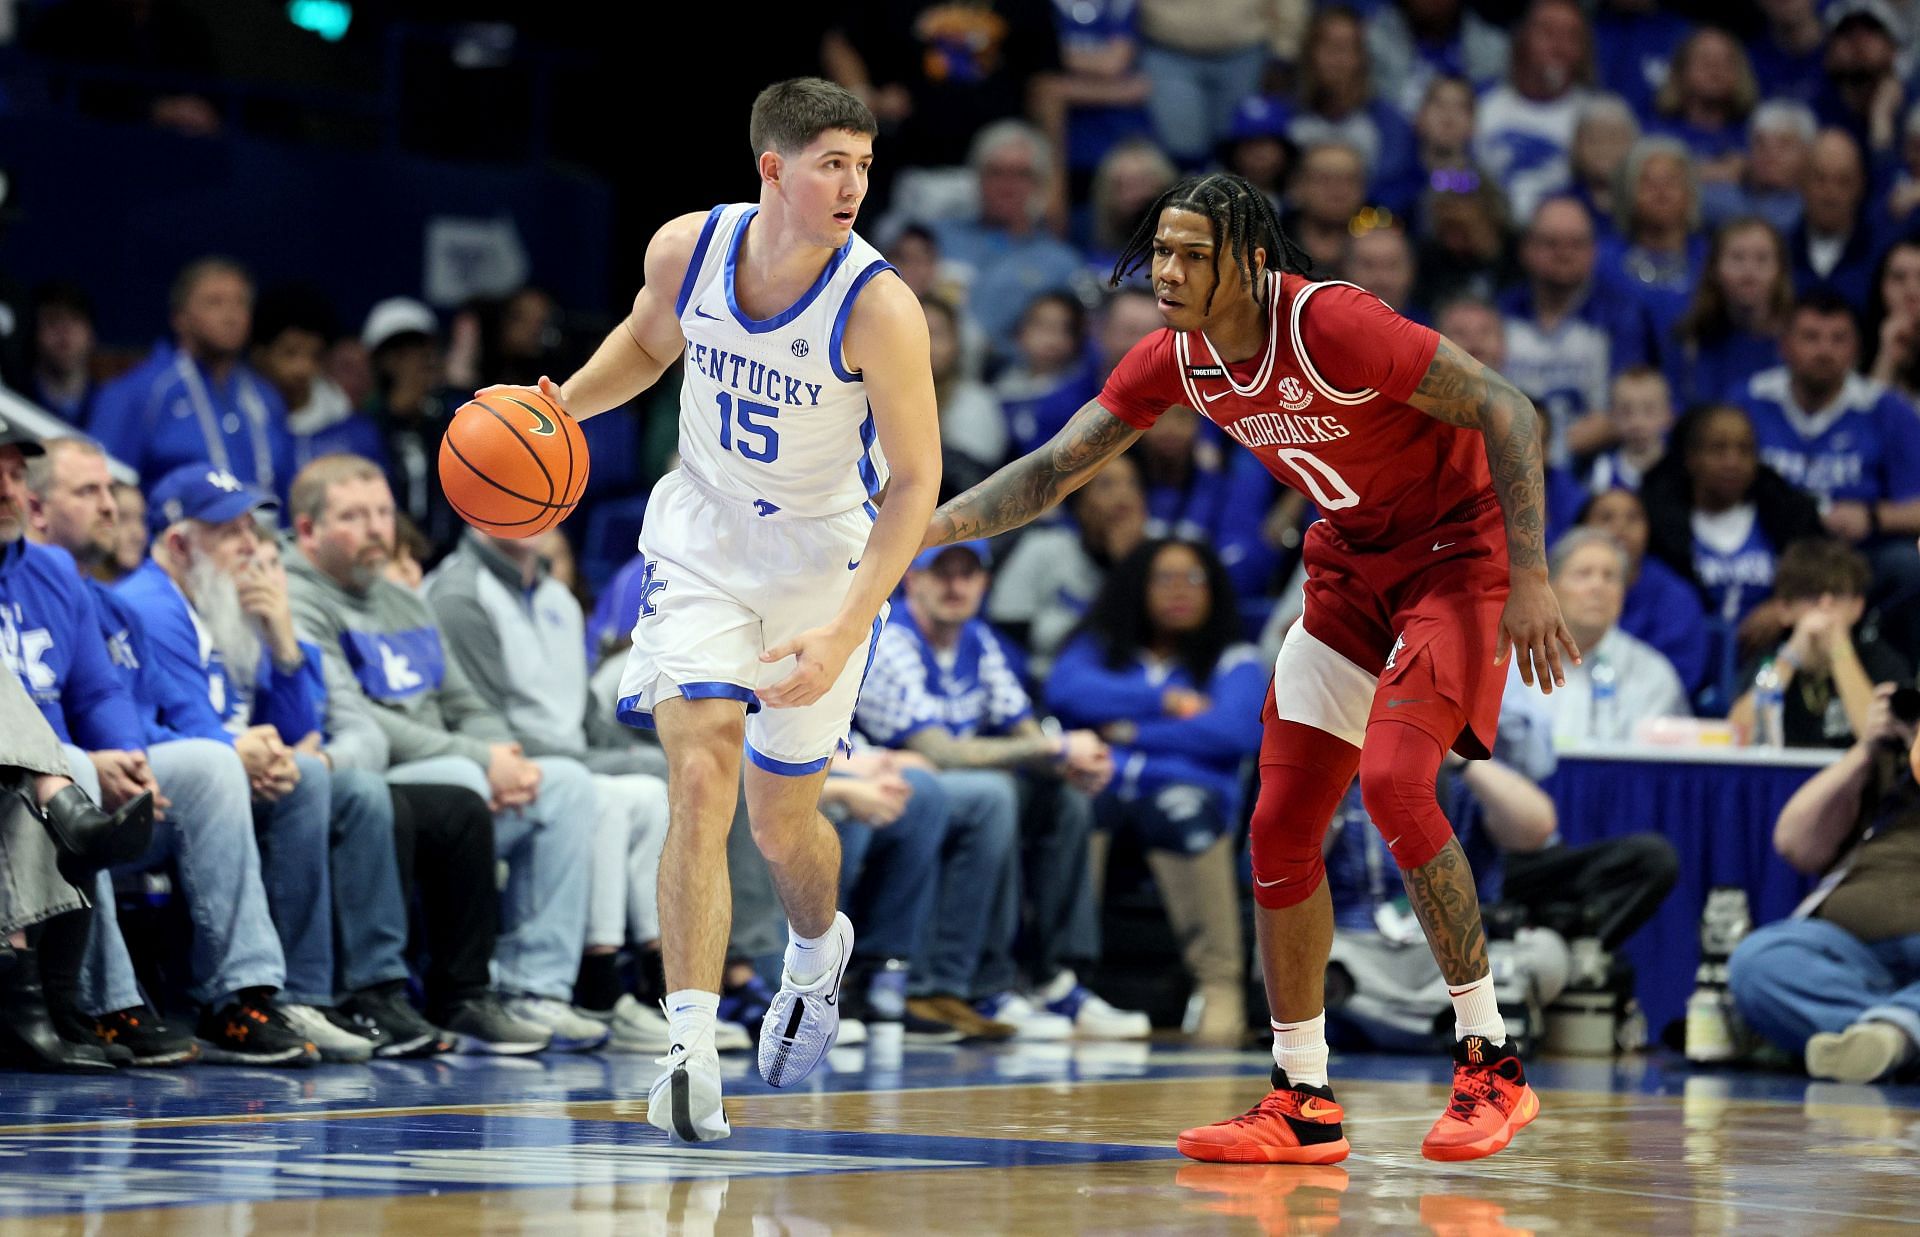 Reed Sheppard #15 of the Kentucky Wildcats dribbles the ball